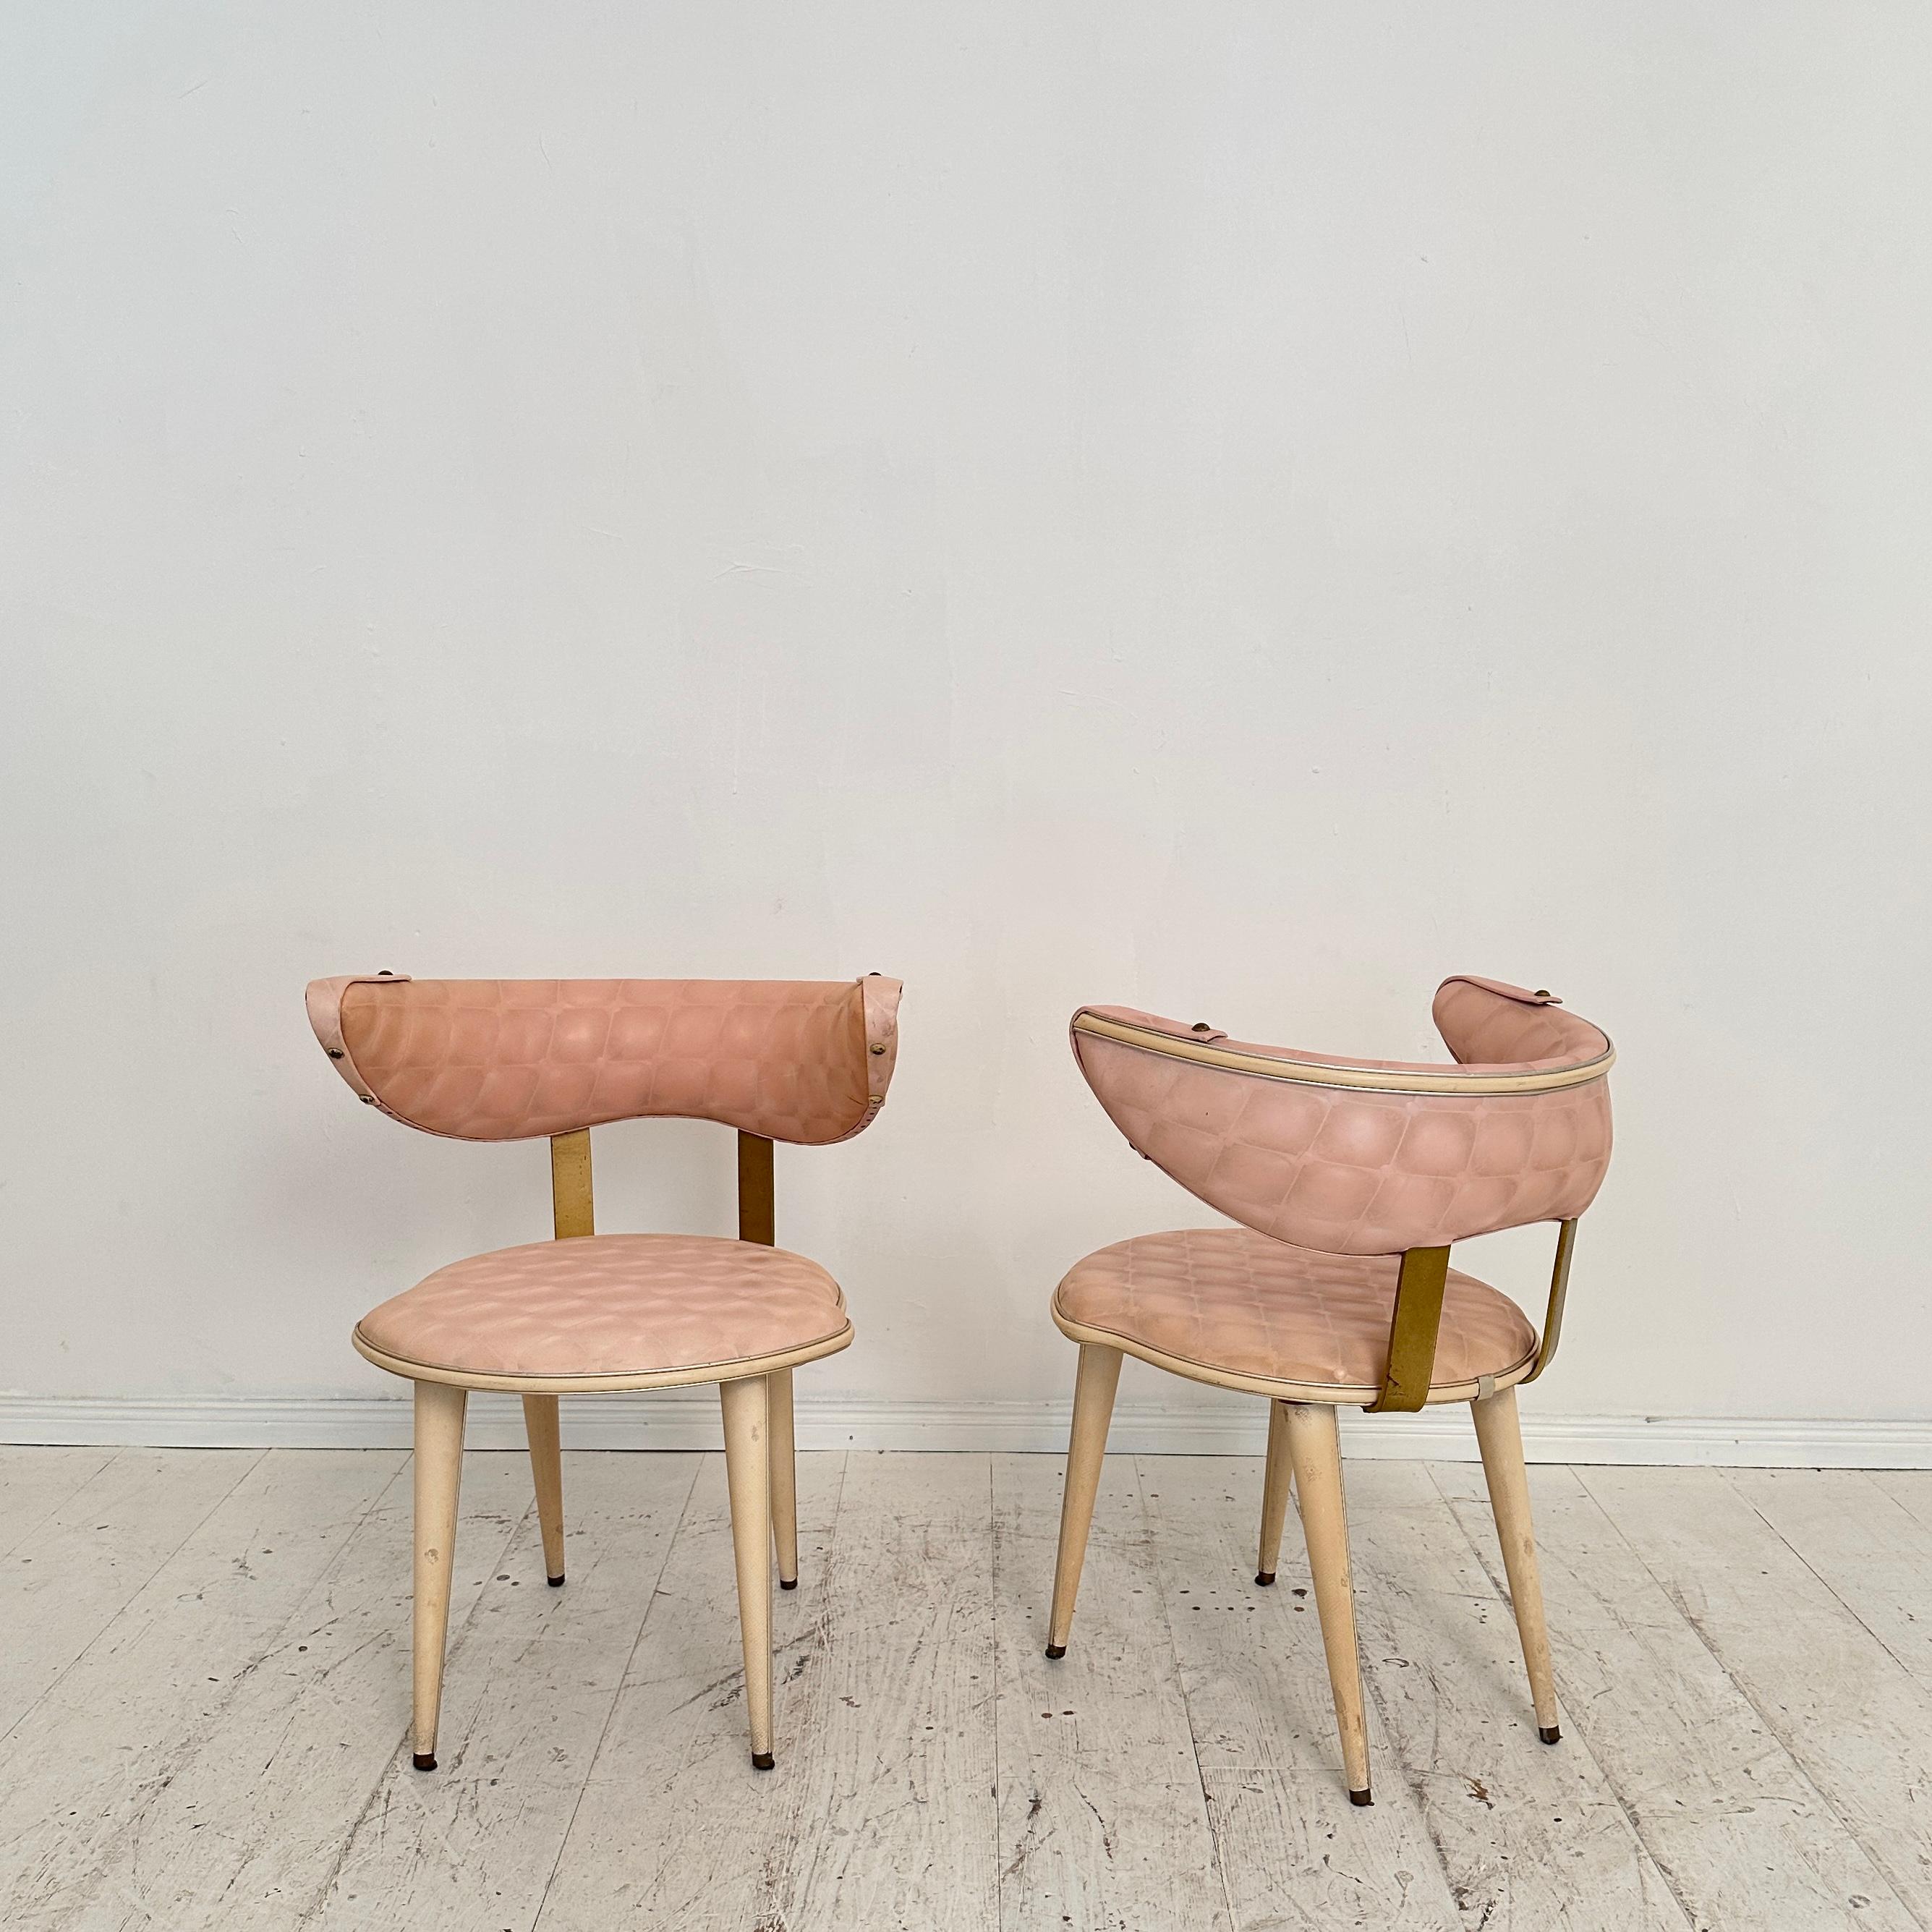 Italian Pair of Mid Century Armchairs by Umberto Mascagni, light pink and white, 1954 For Sale